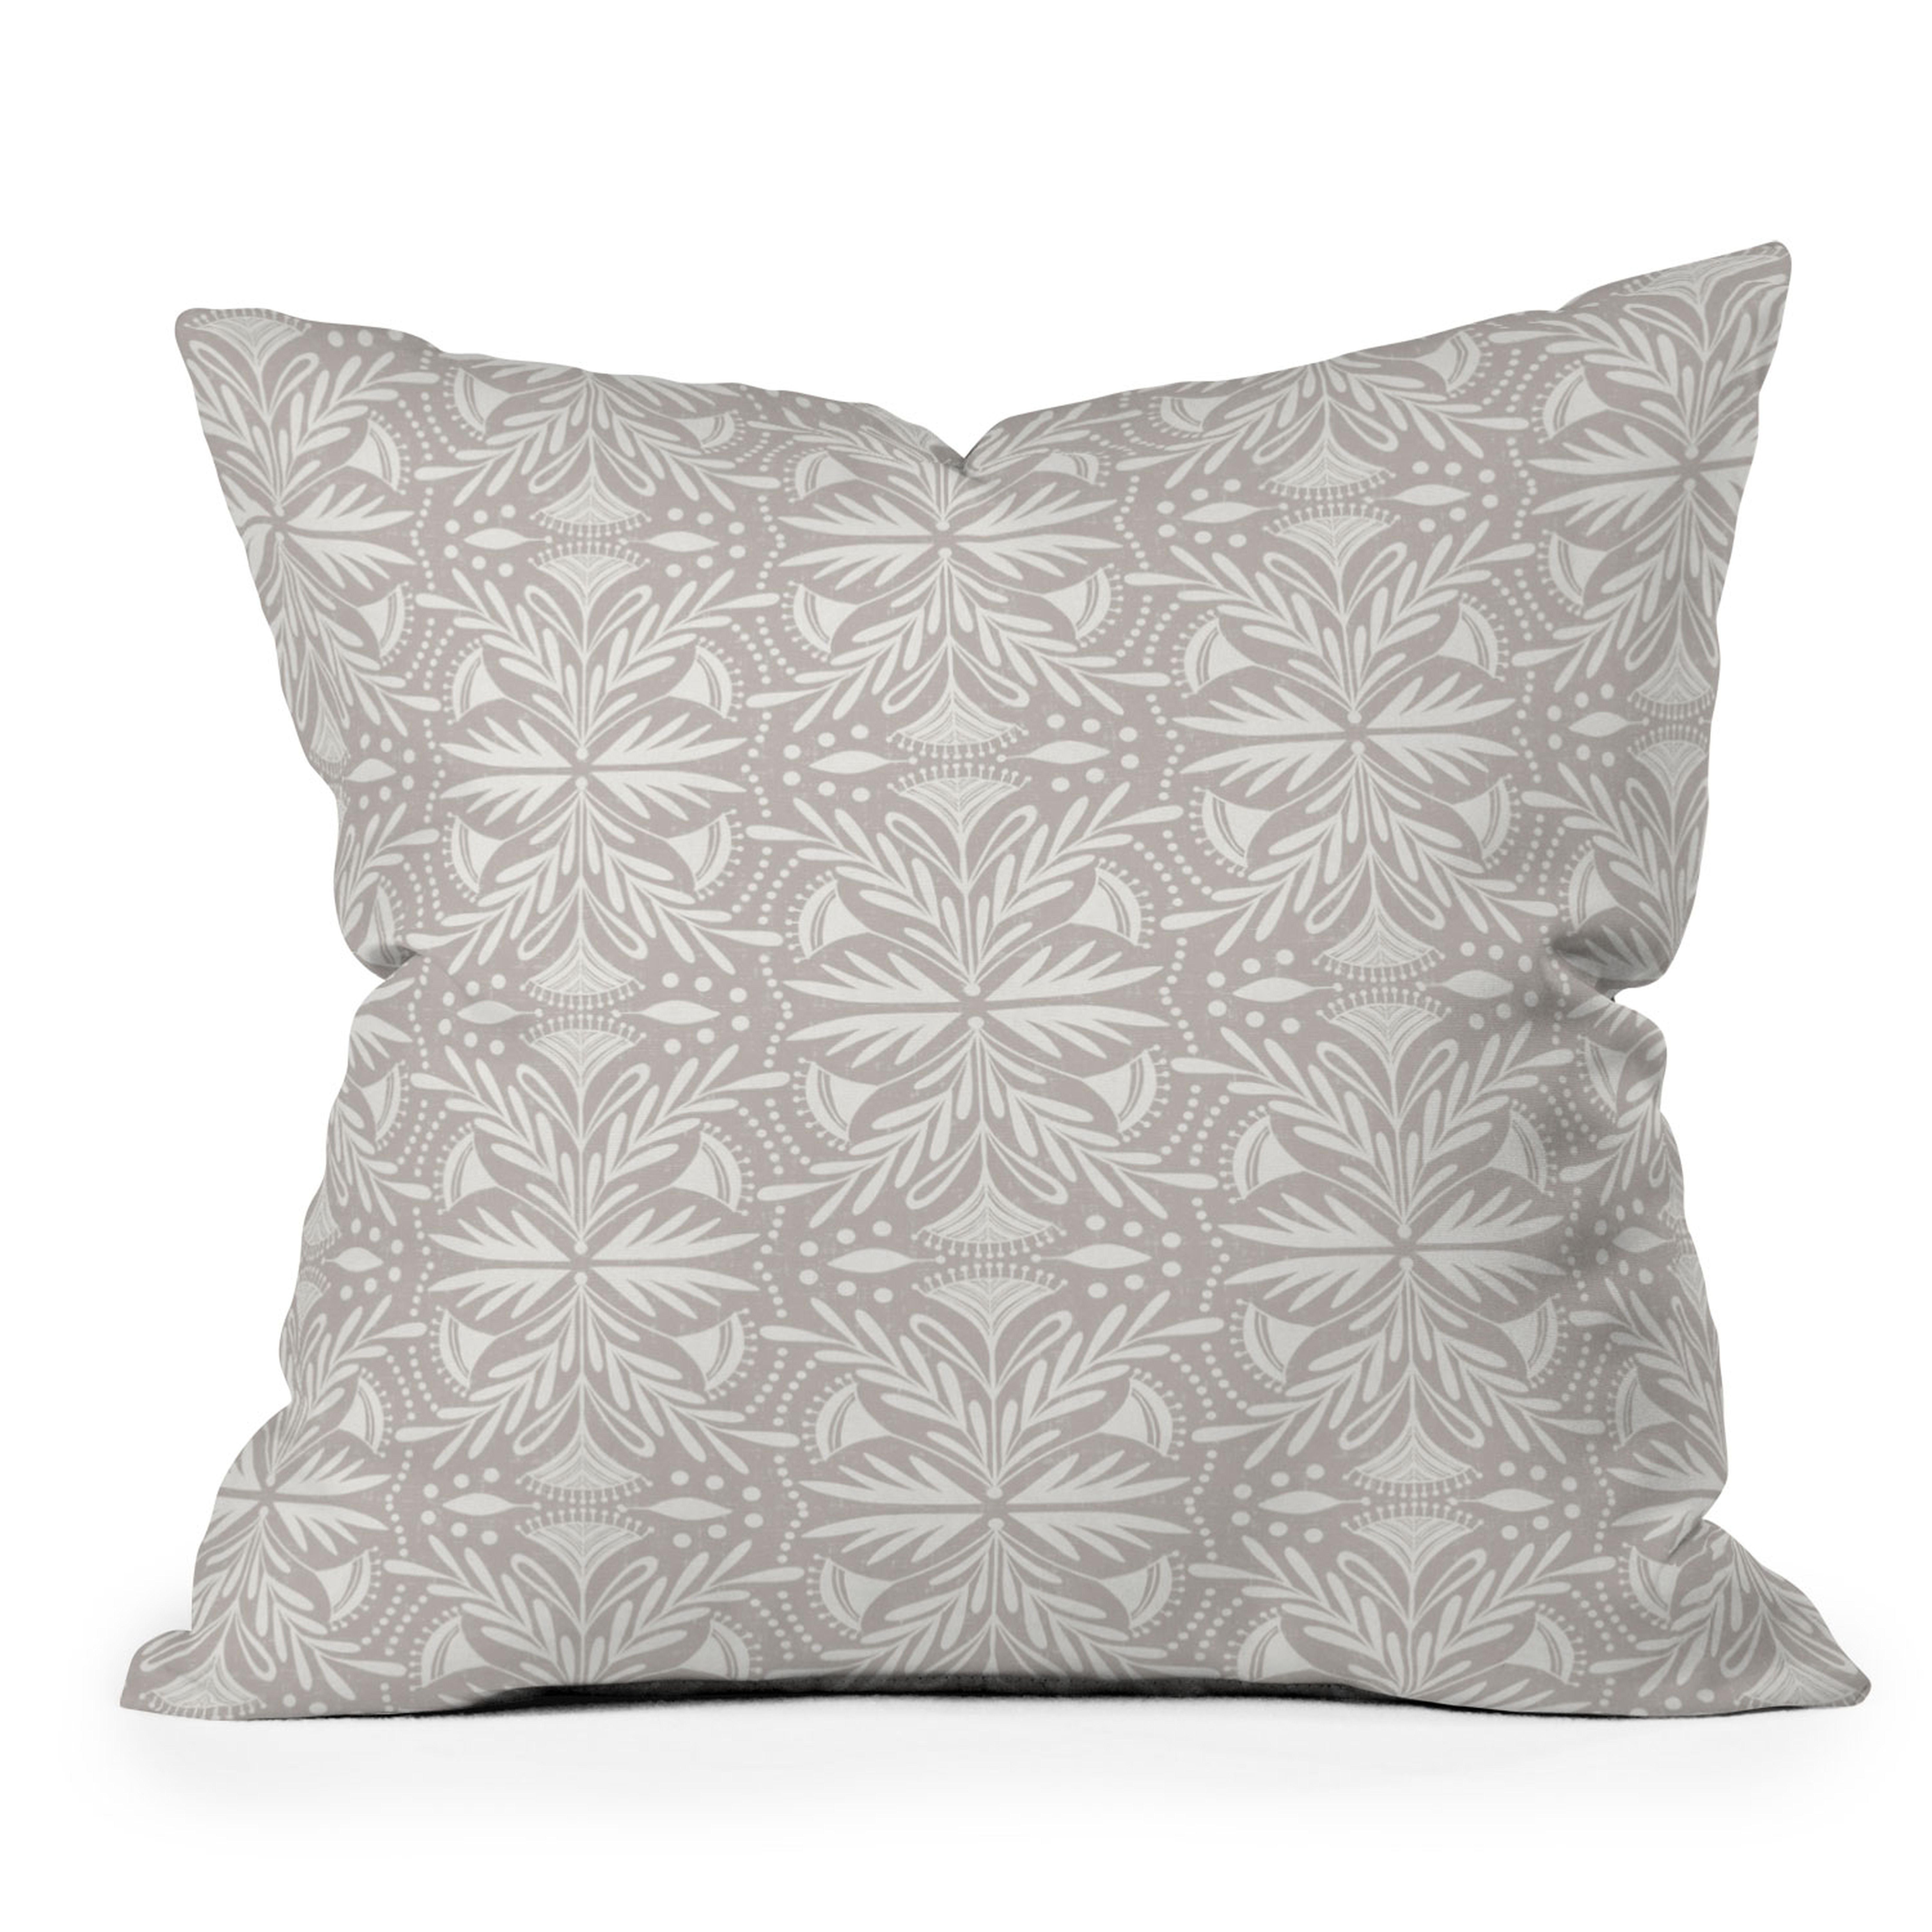 Lenox Stone by Heather Dutton - Outdoor Throw Pillow 20" x 20" - Wander Print Co.